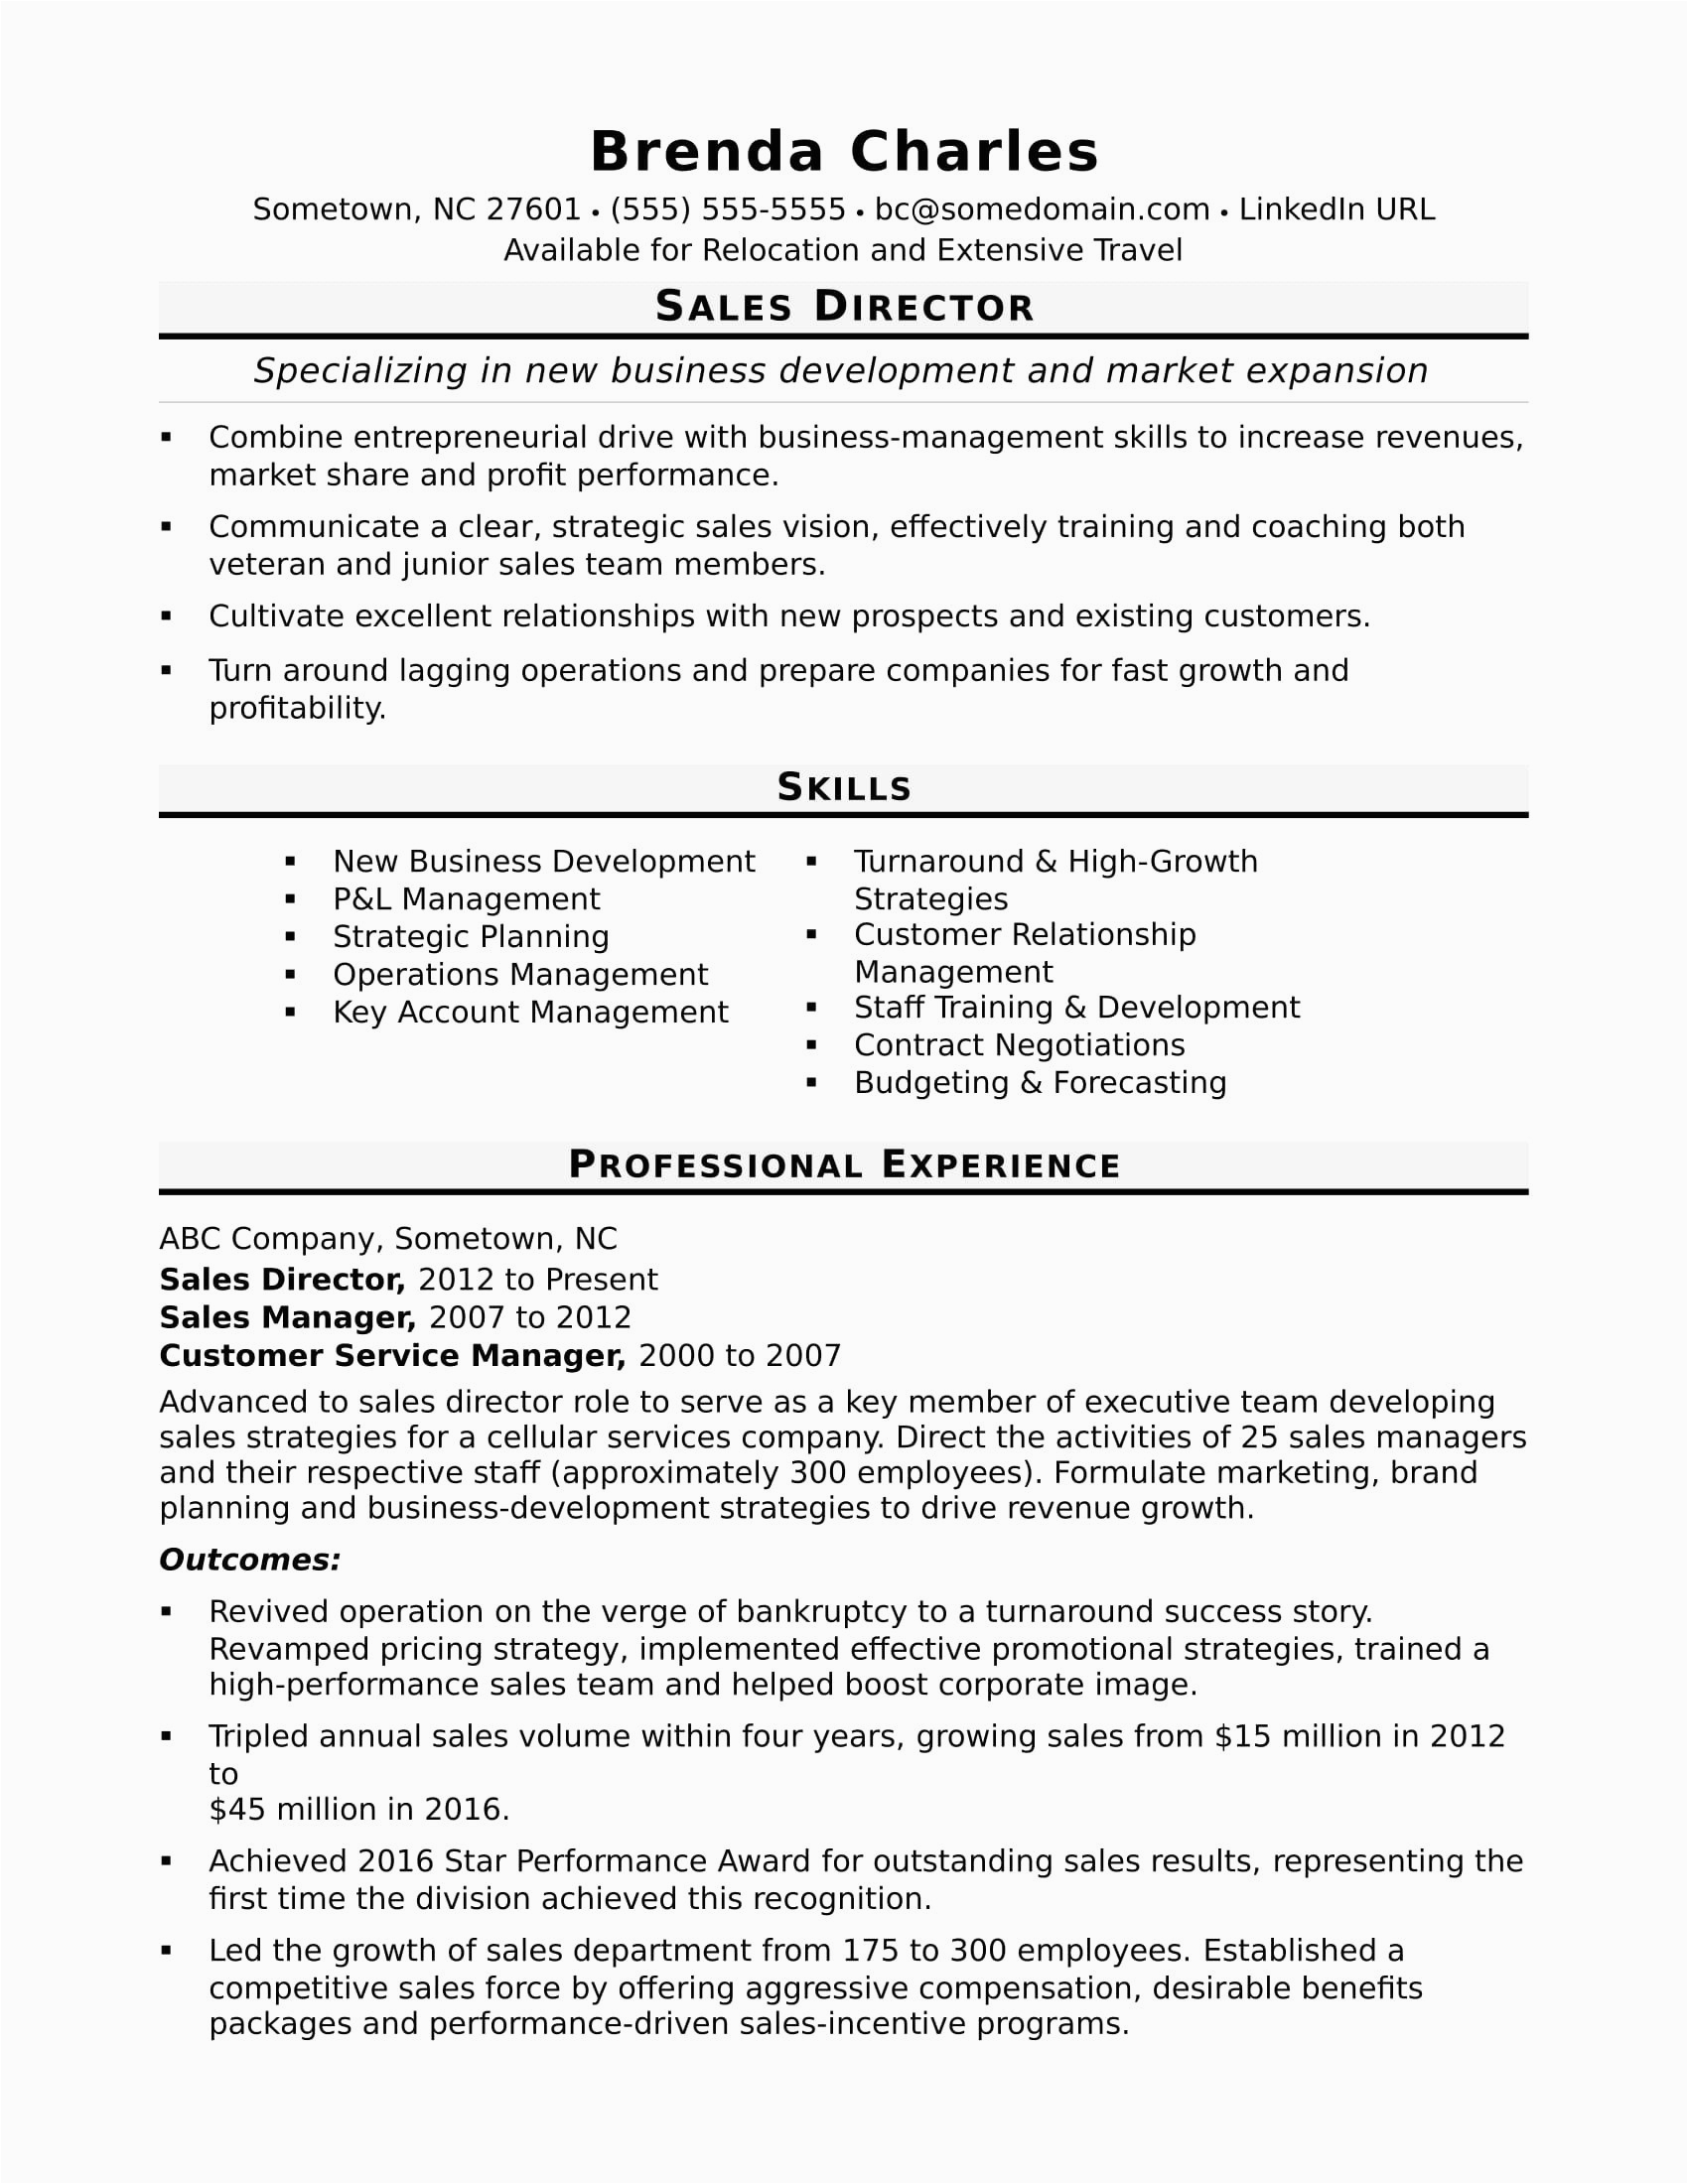 Sample Resume Promotion within Same Company √ 20 Resume for Promotion within Same Pany ™